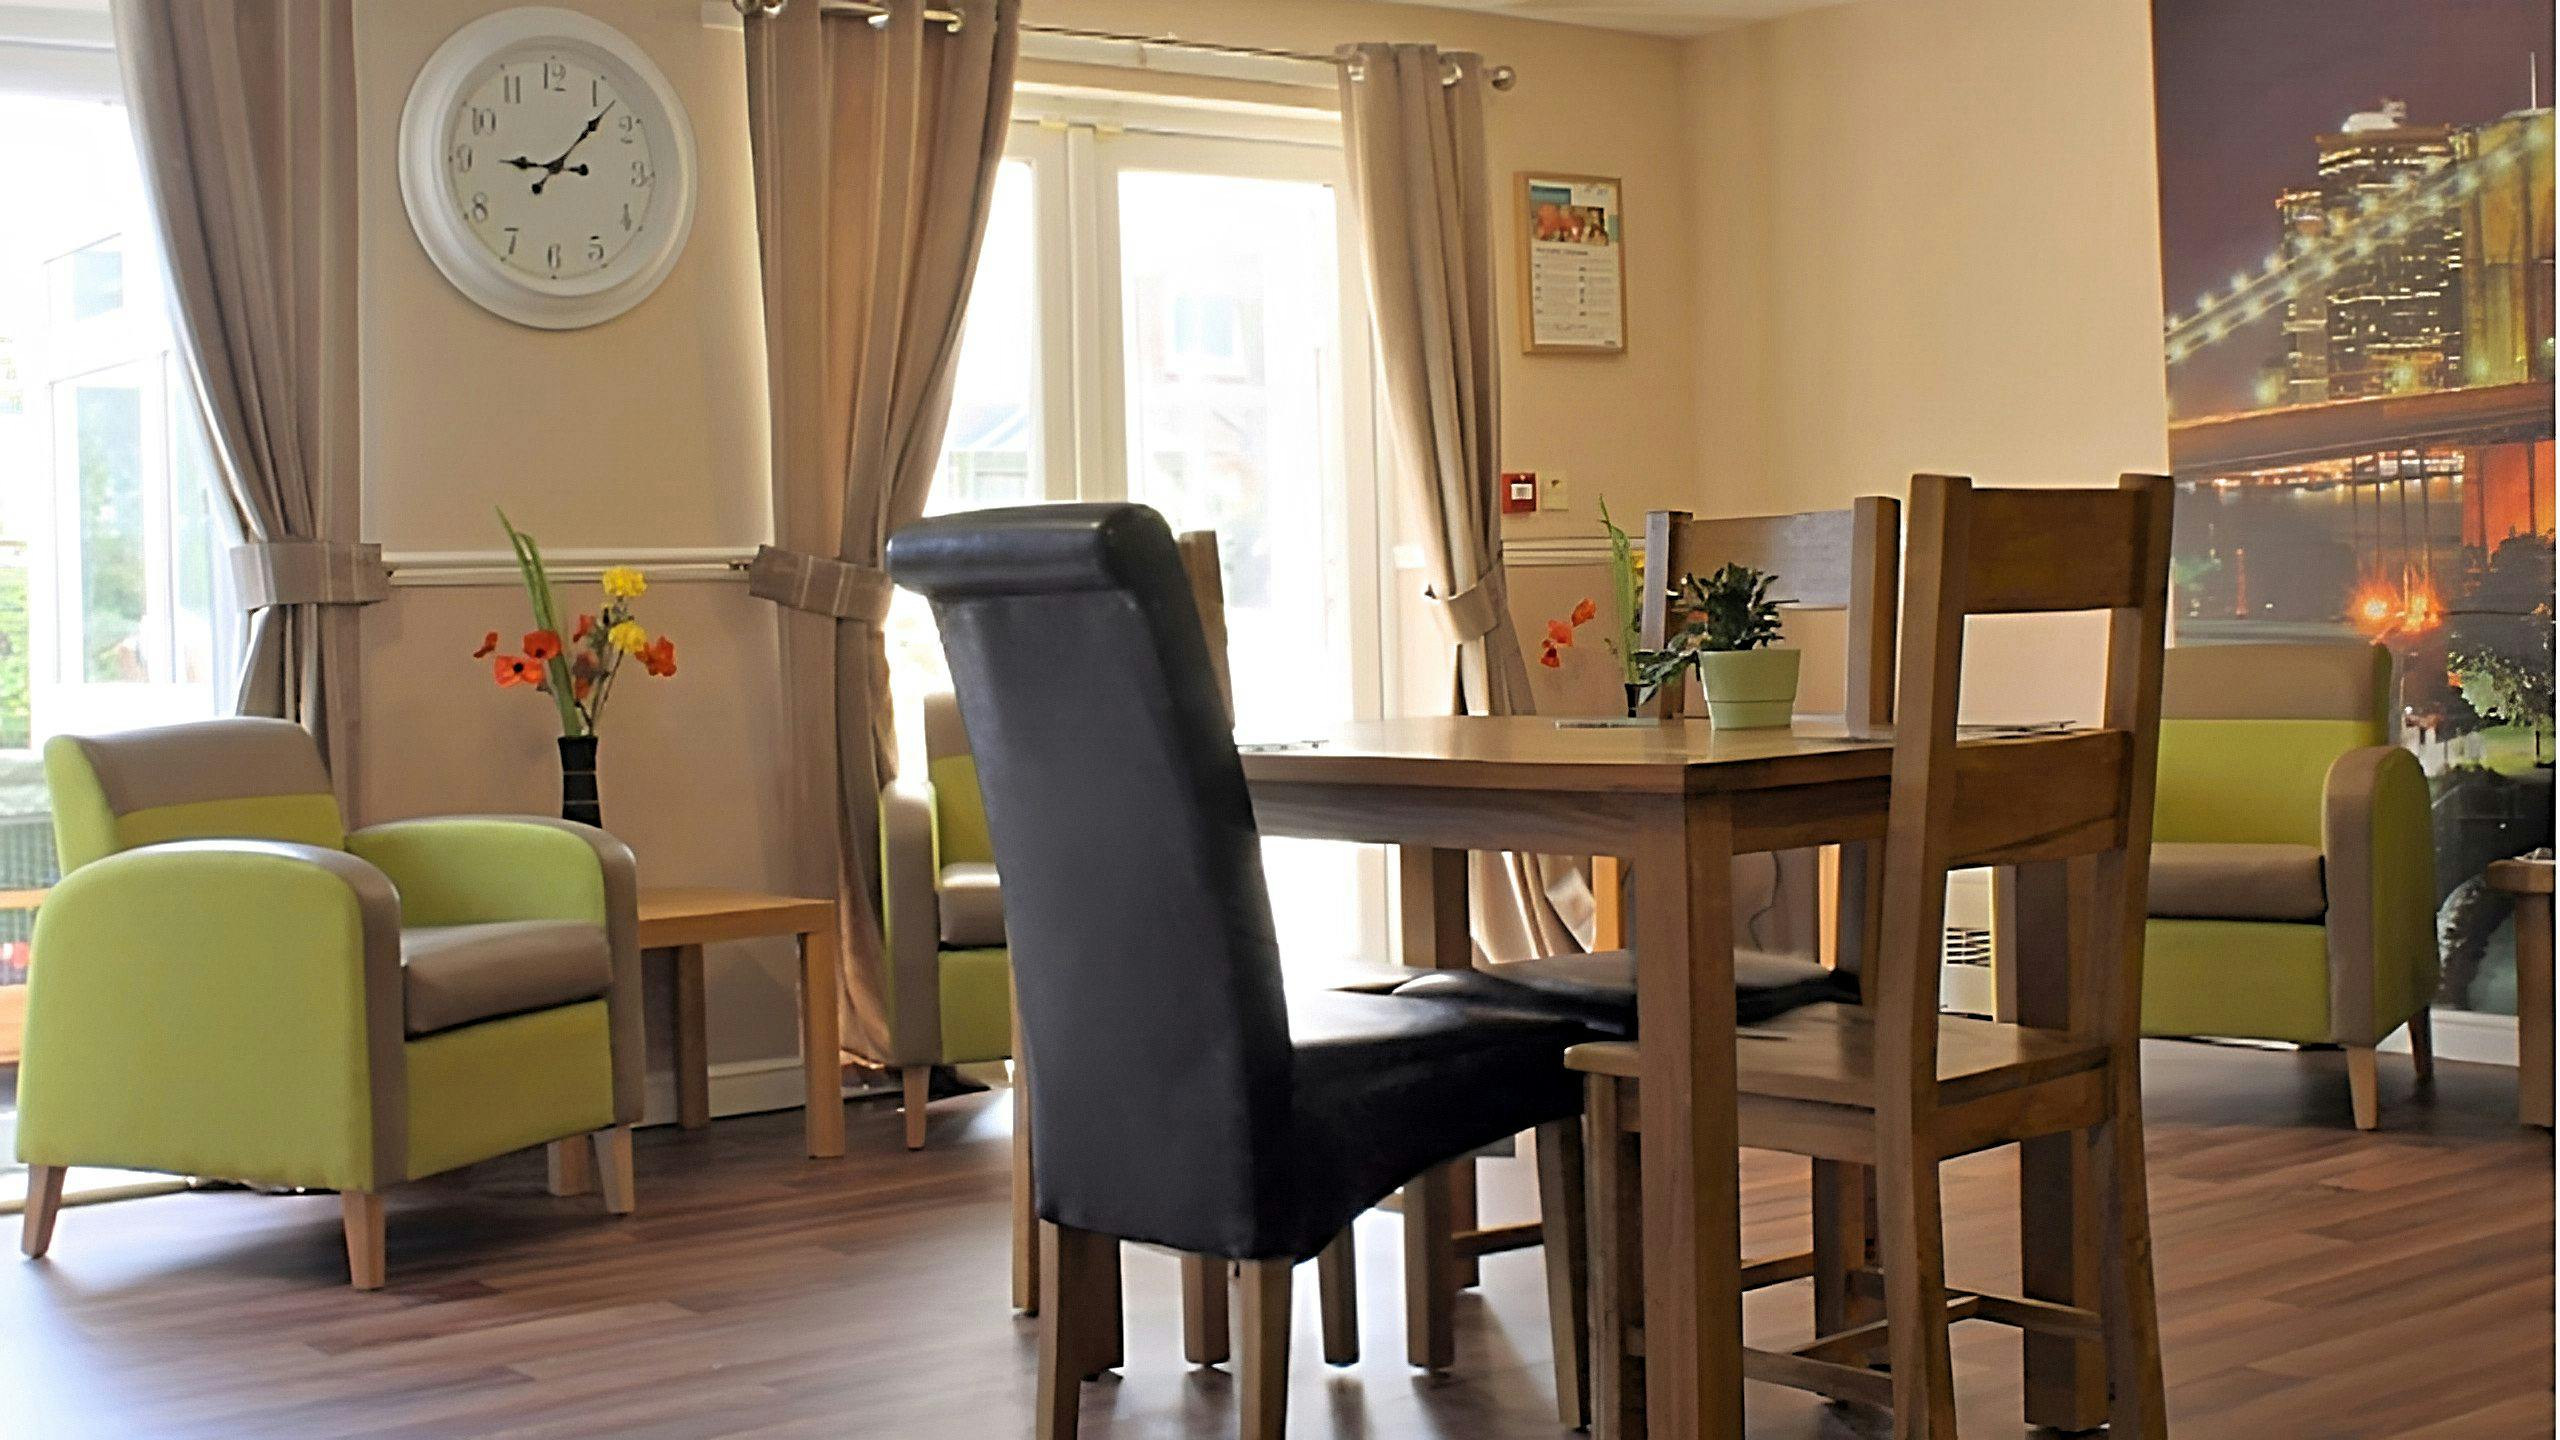 Countrywide - Earsdon Grange care home 6